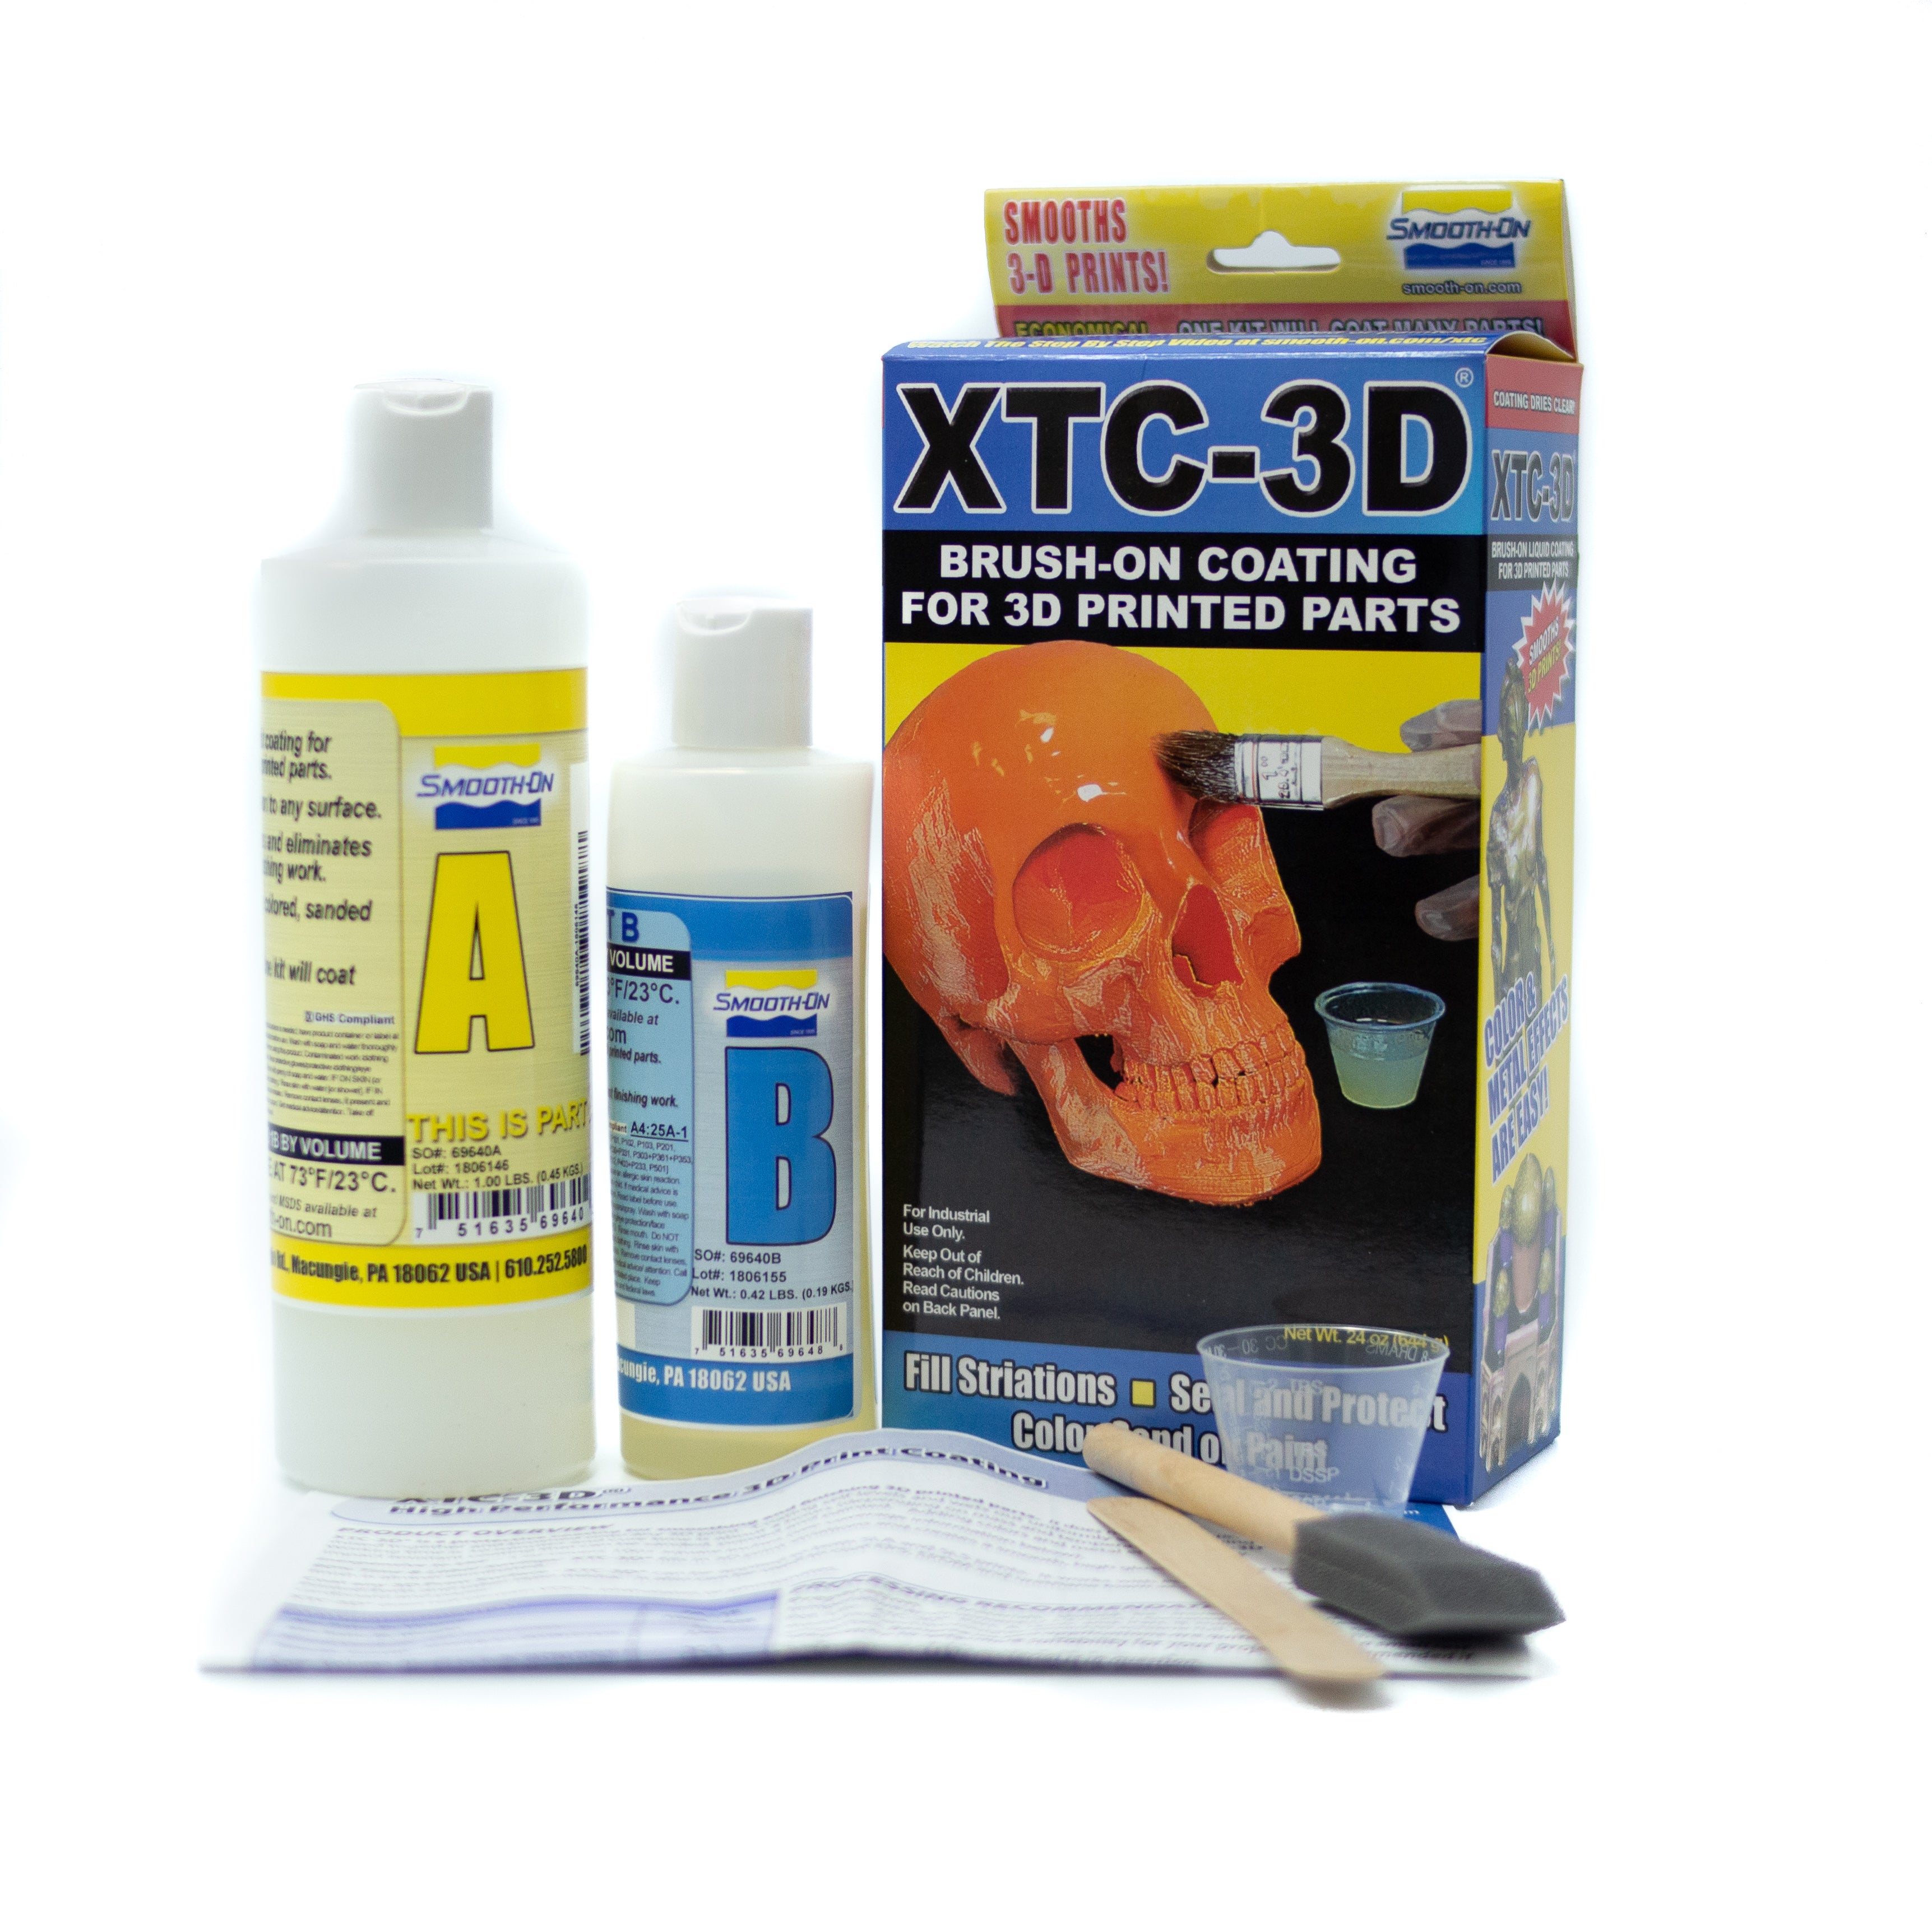 XTC 3D - Brush on coating for 3D printed parts - 644gm